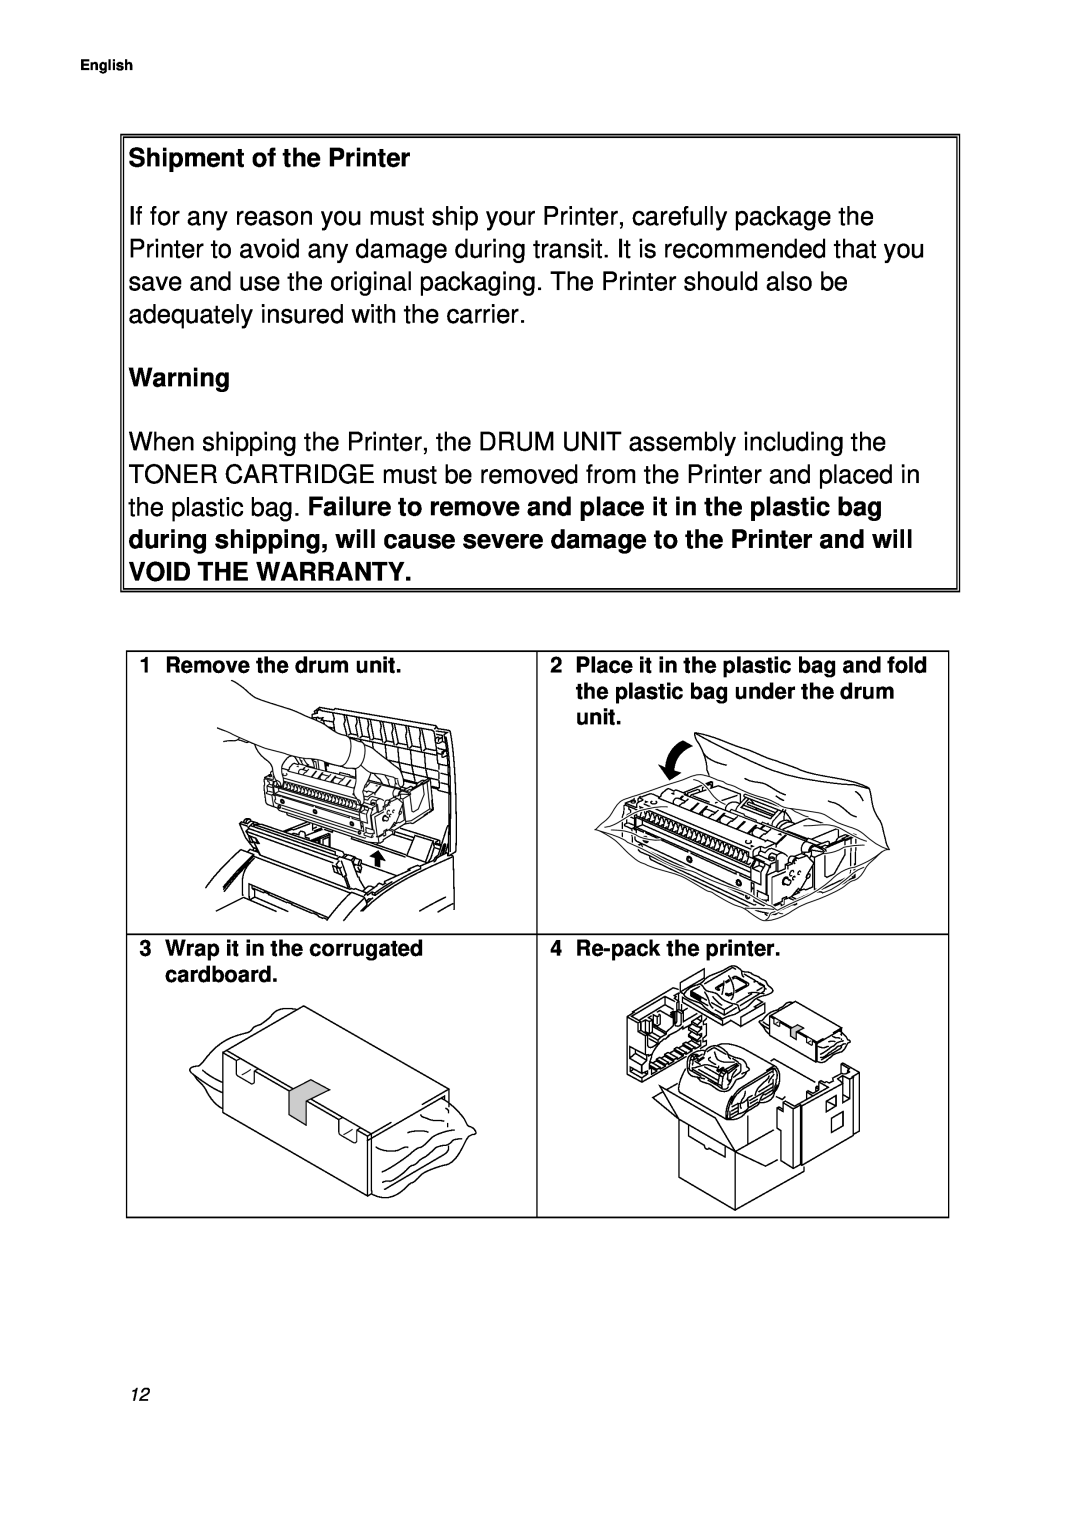 Brother WL-660 Series setup guide Shipment of the Printer, Void The Warranty, Remove the drum unit, Re-pack the printer 